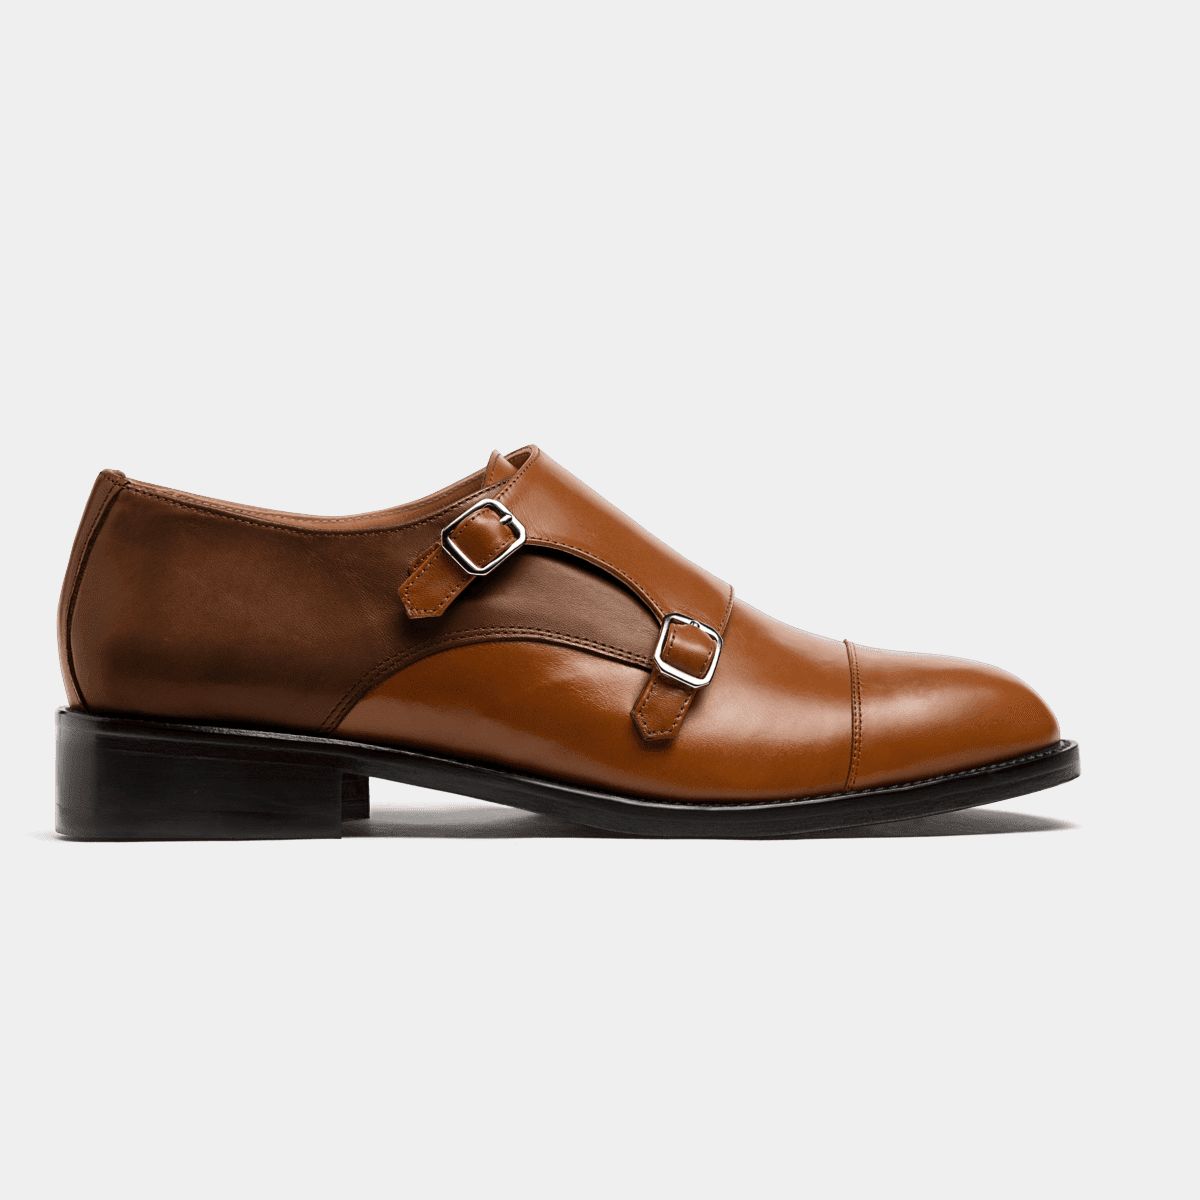 Cap toe Double monk strap shoes - brown italian calf leather | Sumissura